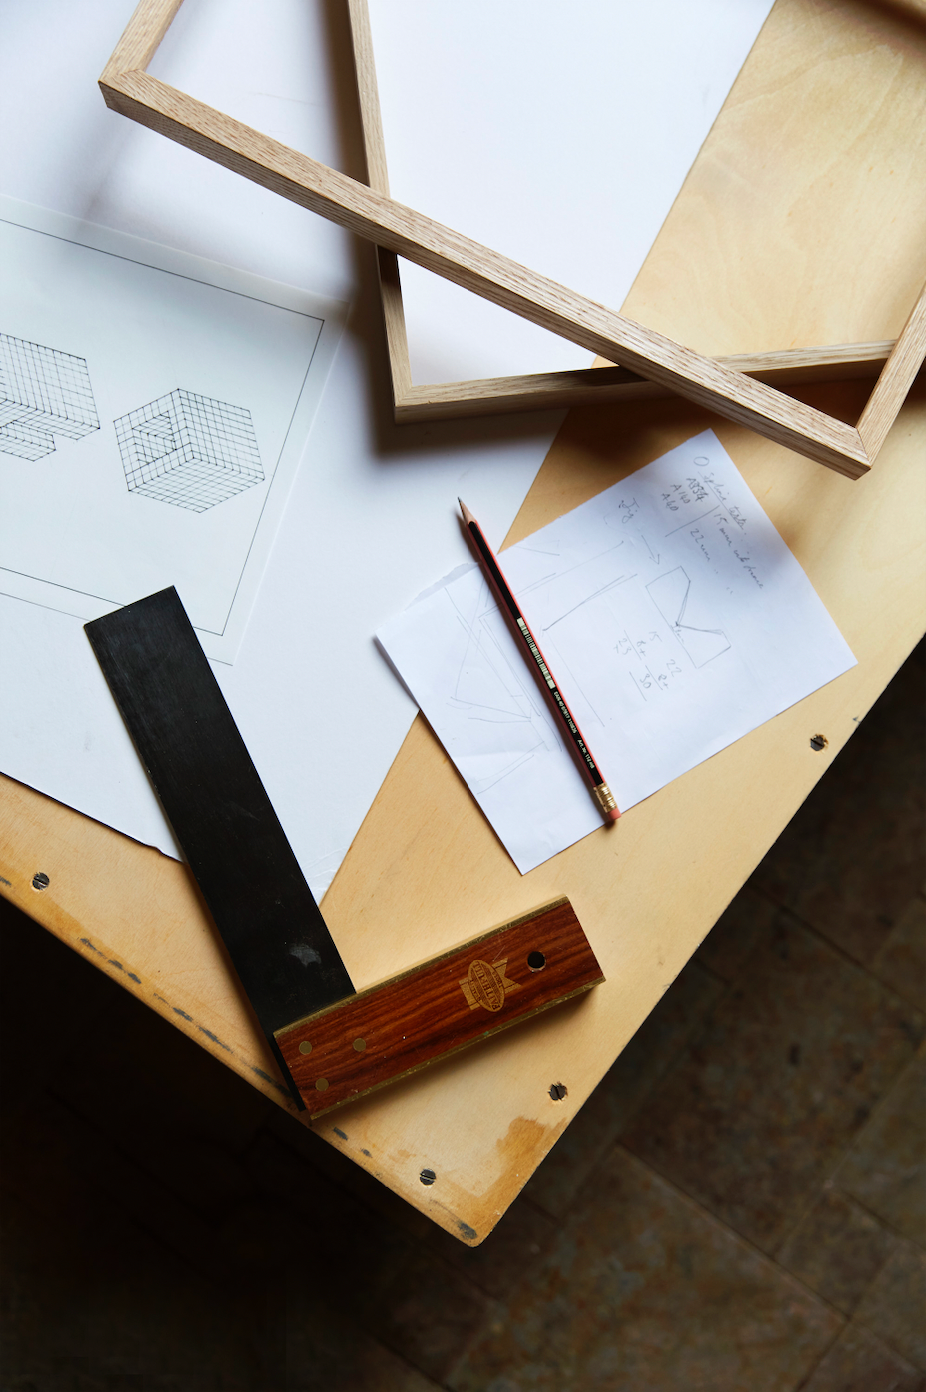 Framemaking tools, and picture frame design plans.